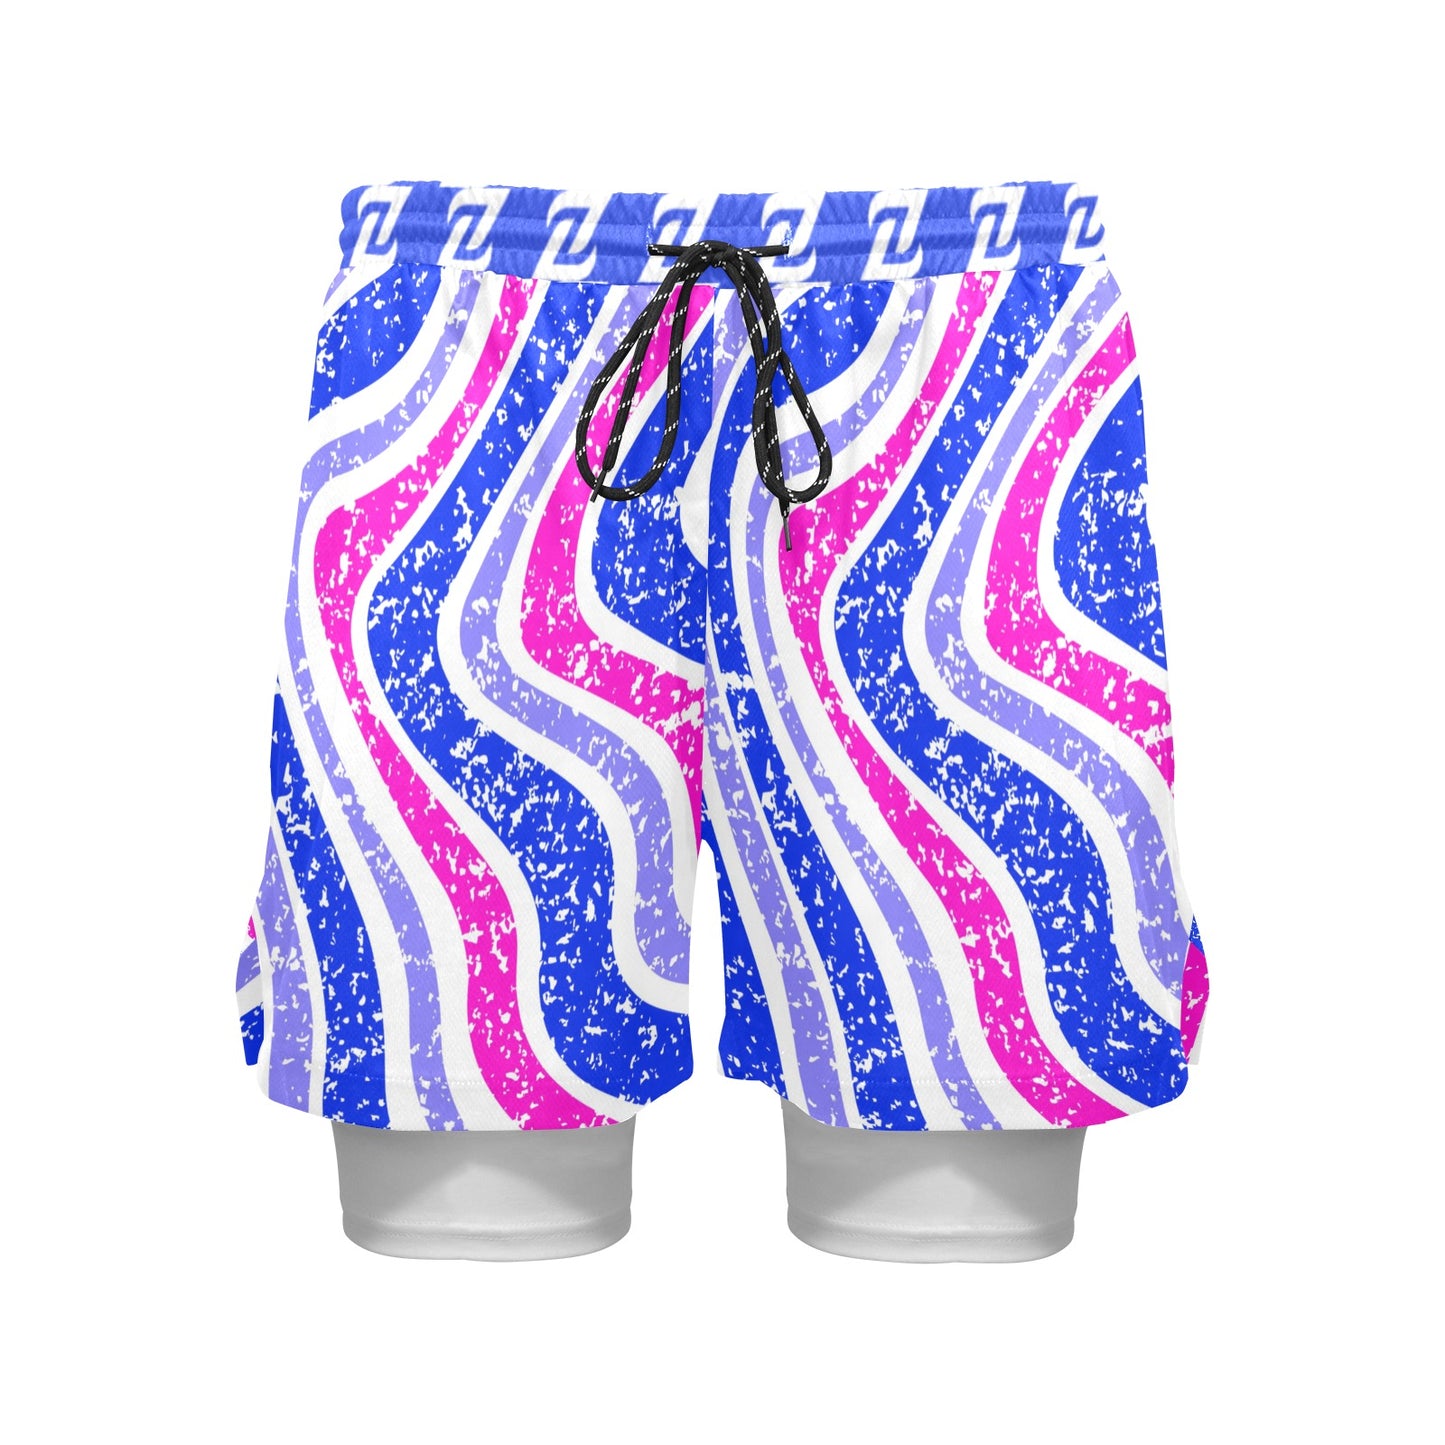 Zen Shorts with Liner - Illusion Wave